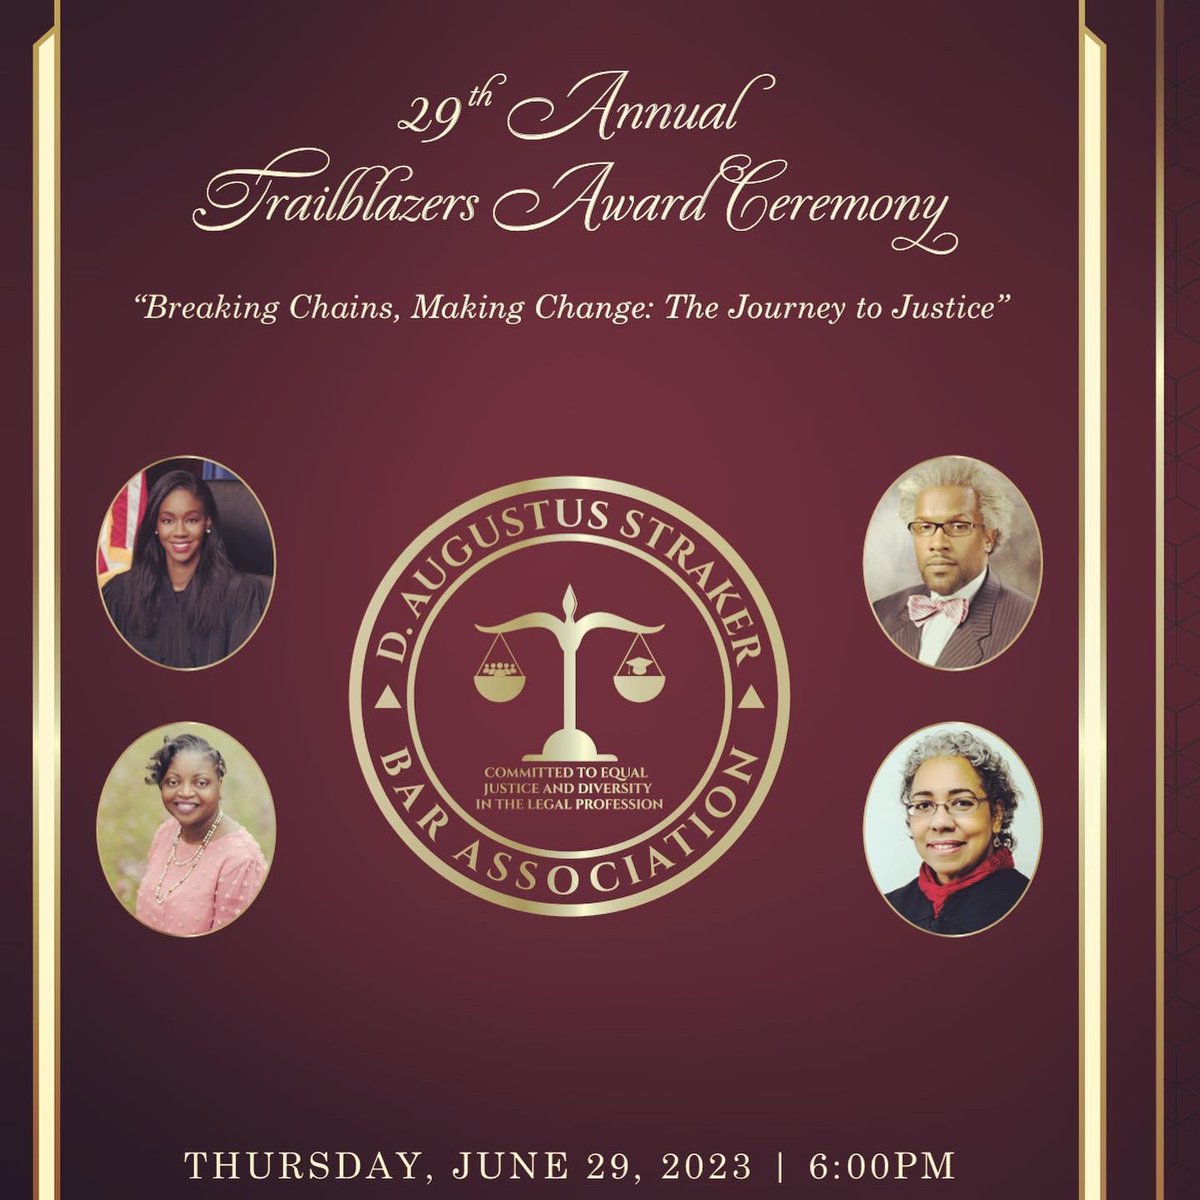 Thank you to the @StrakerBarAssoc for selecting me for your Trailblazer Award. It is honor to be amongst the 2023 class of amazing judges and lawyers.